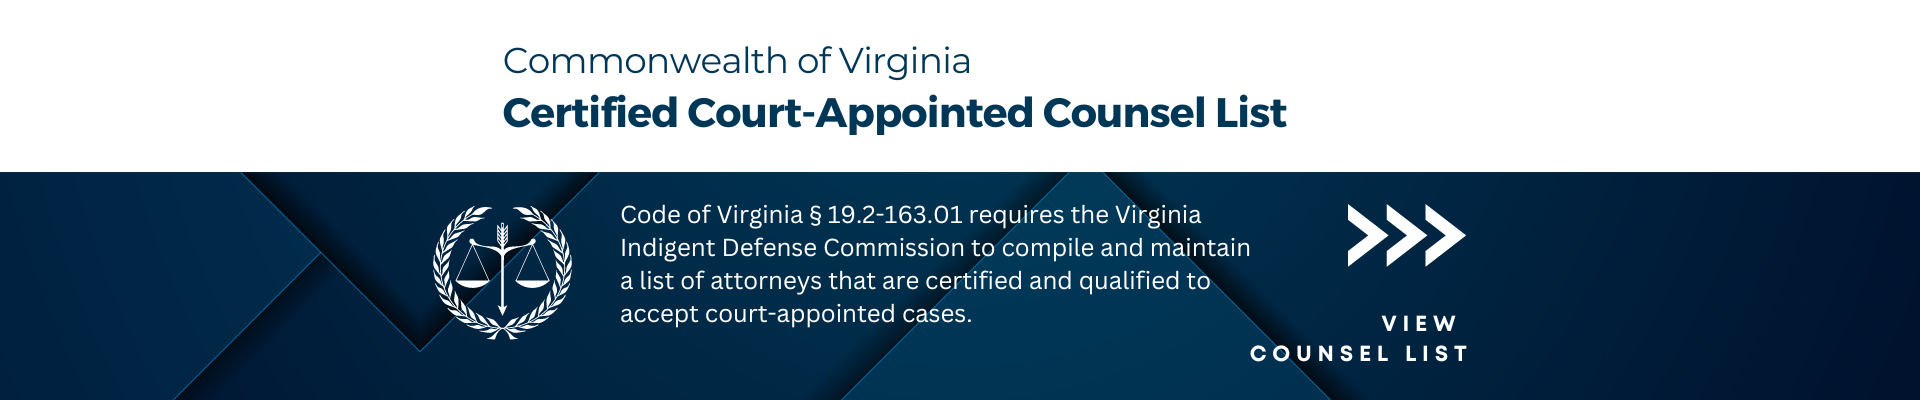 Certified Court Appointed List. Code of Virginia § 19.2-163.01 requires the Virginia Indigent Defense Commission to compile and maintain a list of attorneys that are certified and qualified to accept court-appointed cases.